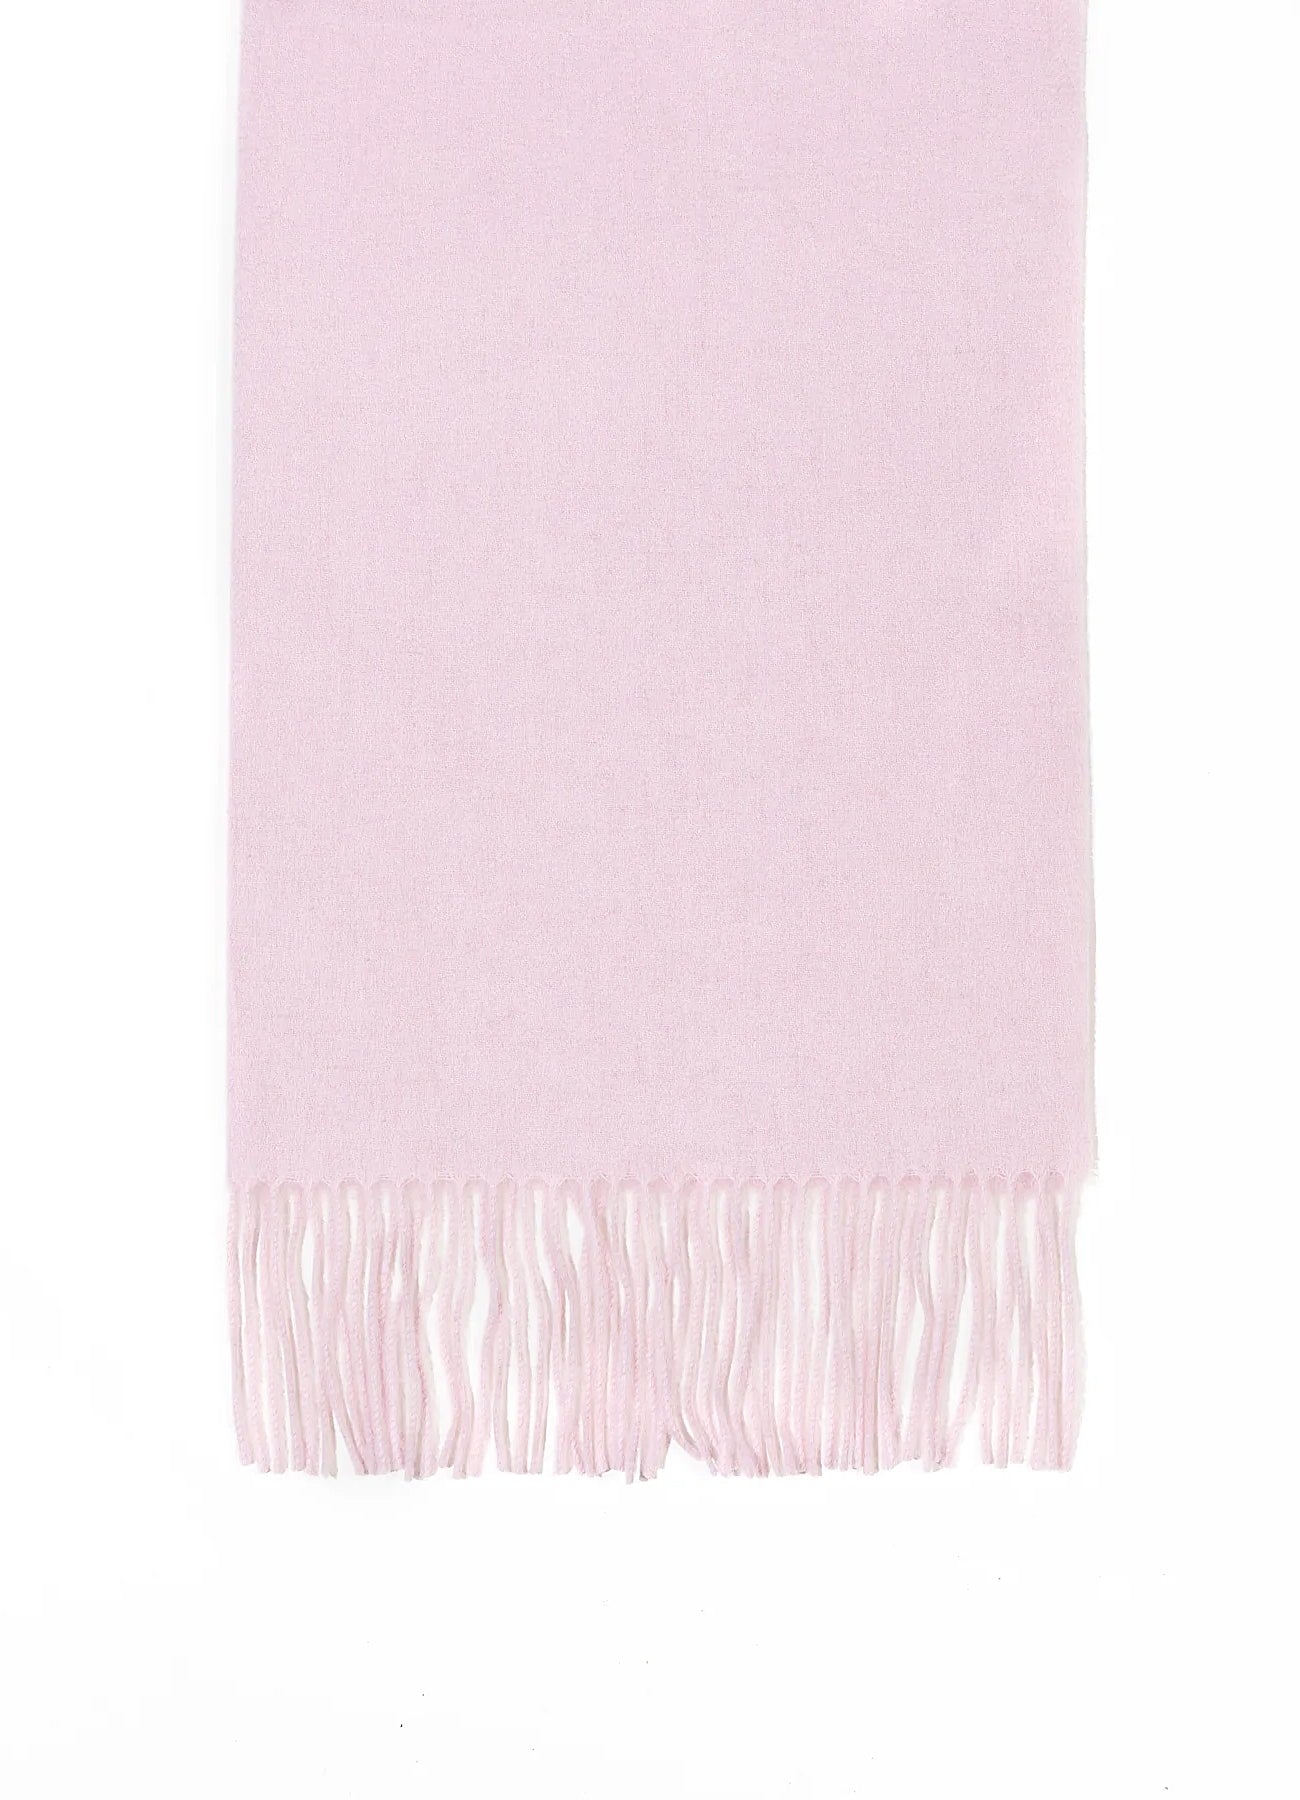 Scarf Plain Light Pink 100% Pure Lambswool